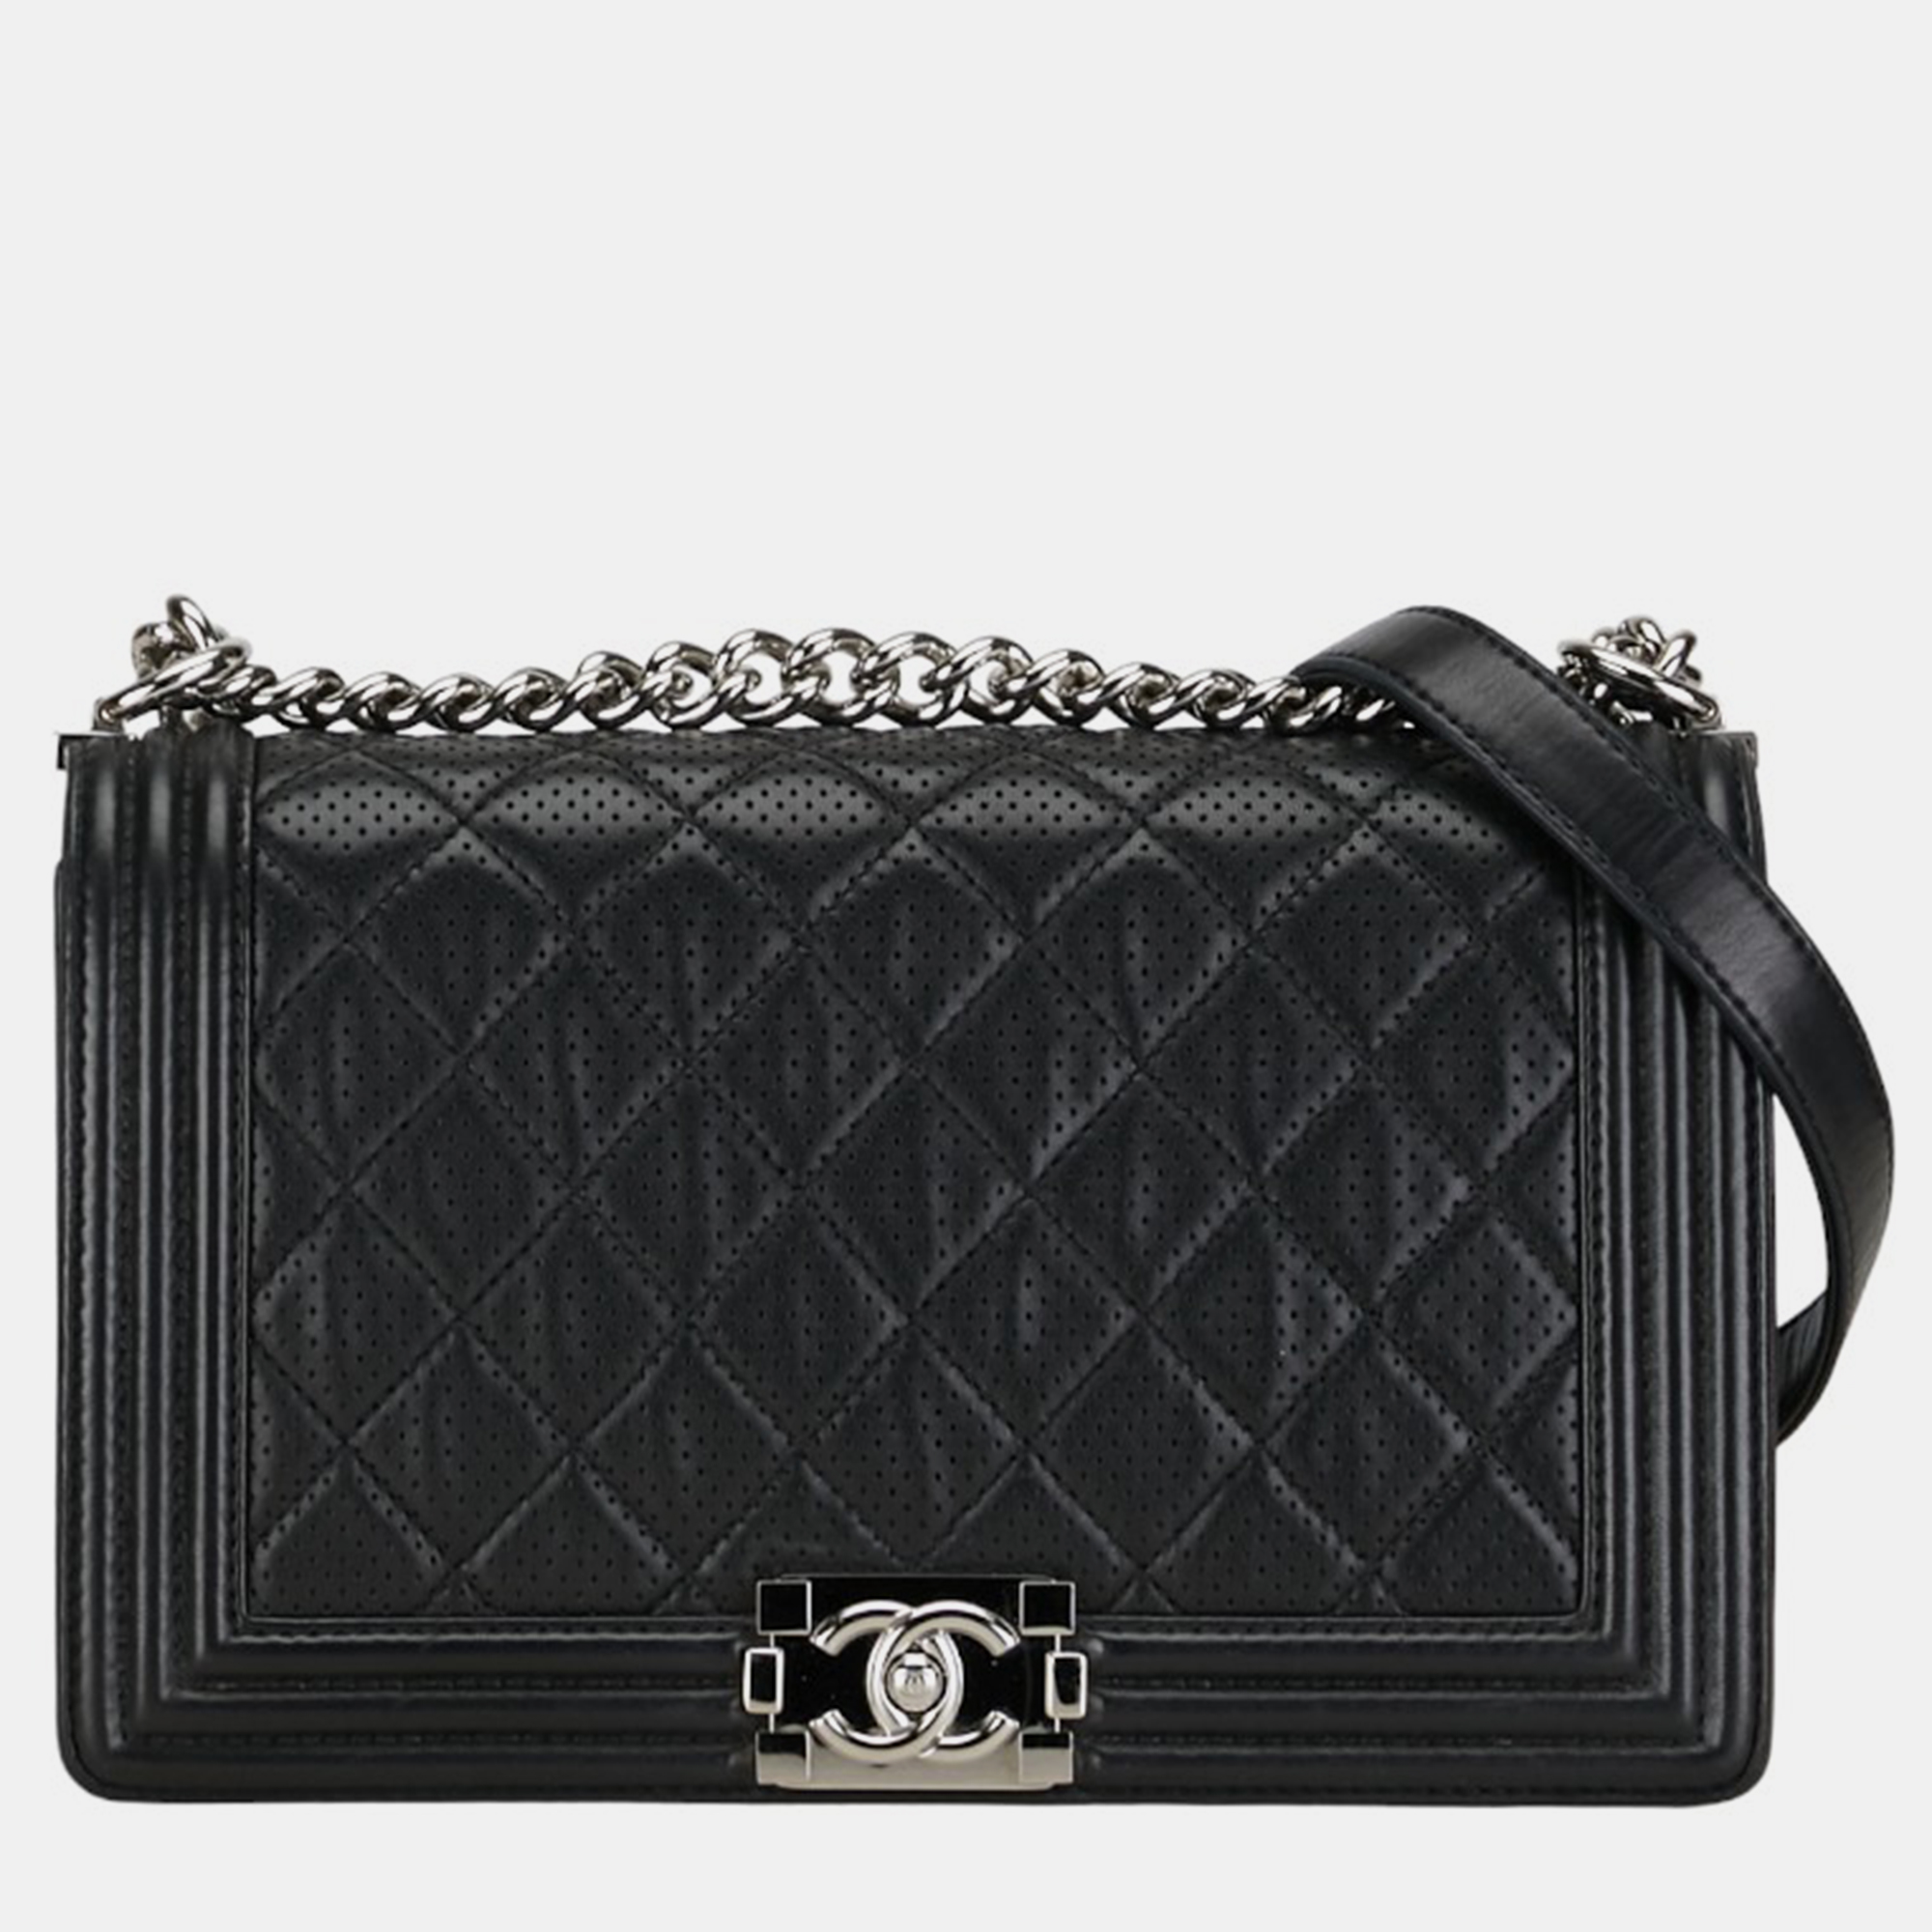 

Chanel Black Perforated Leather Boy Large Flap Bag